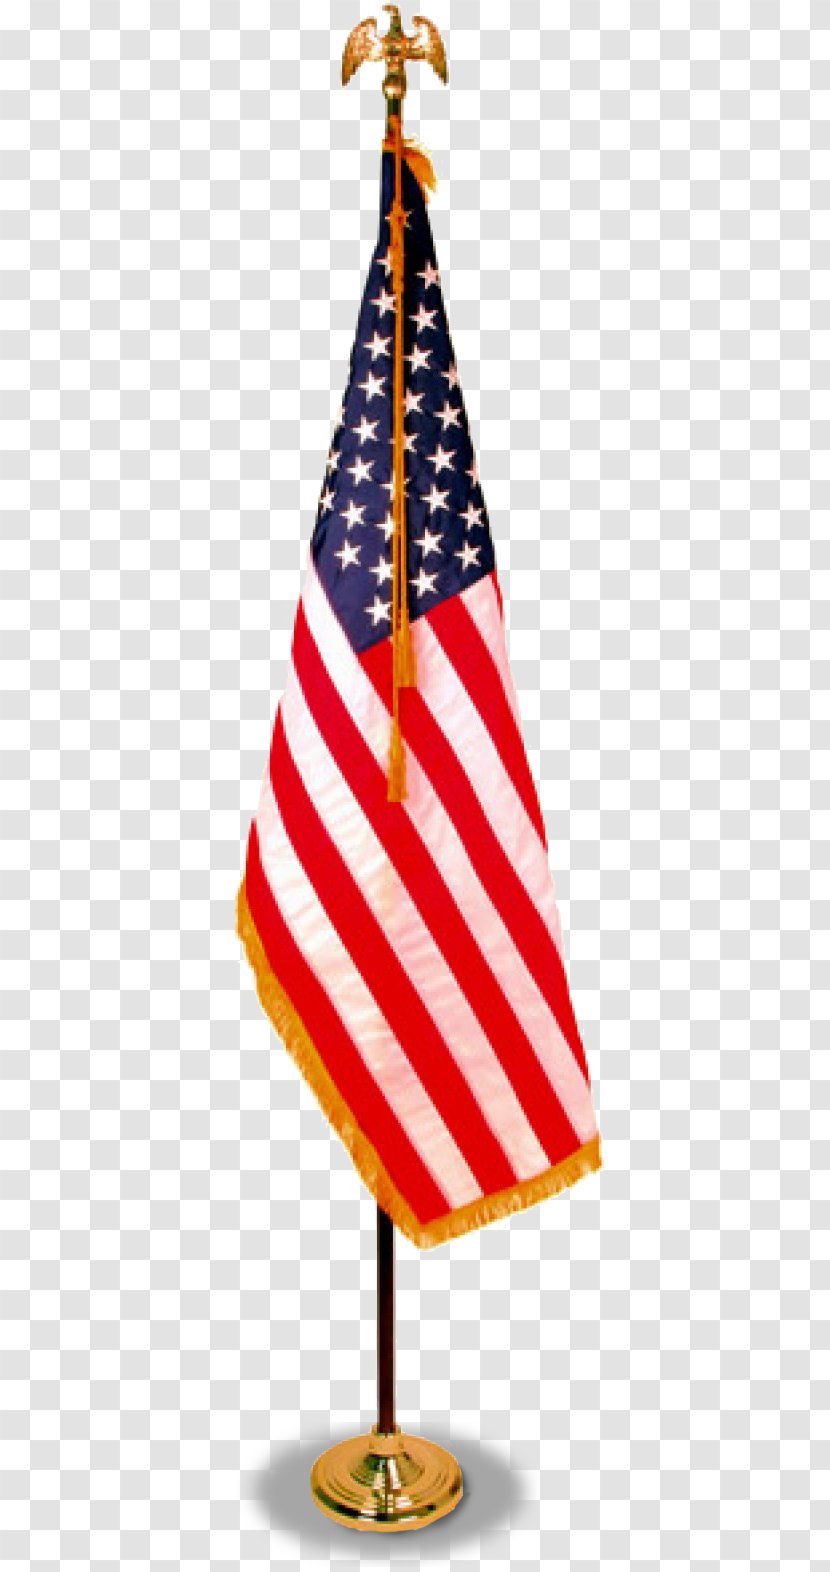 Flag Of The United States Image - Flagpole - May Pole Day Festival Transparent PNG